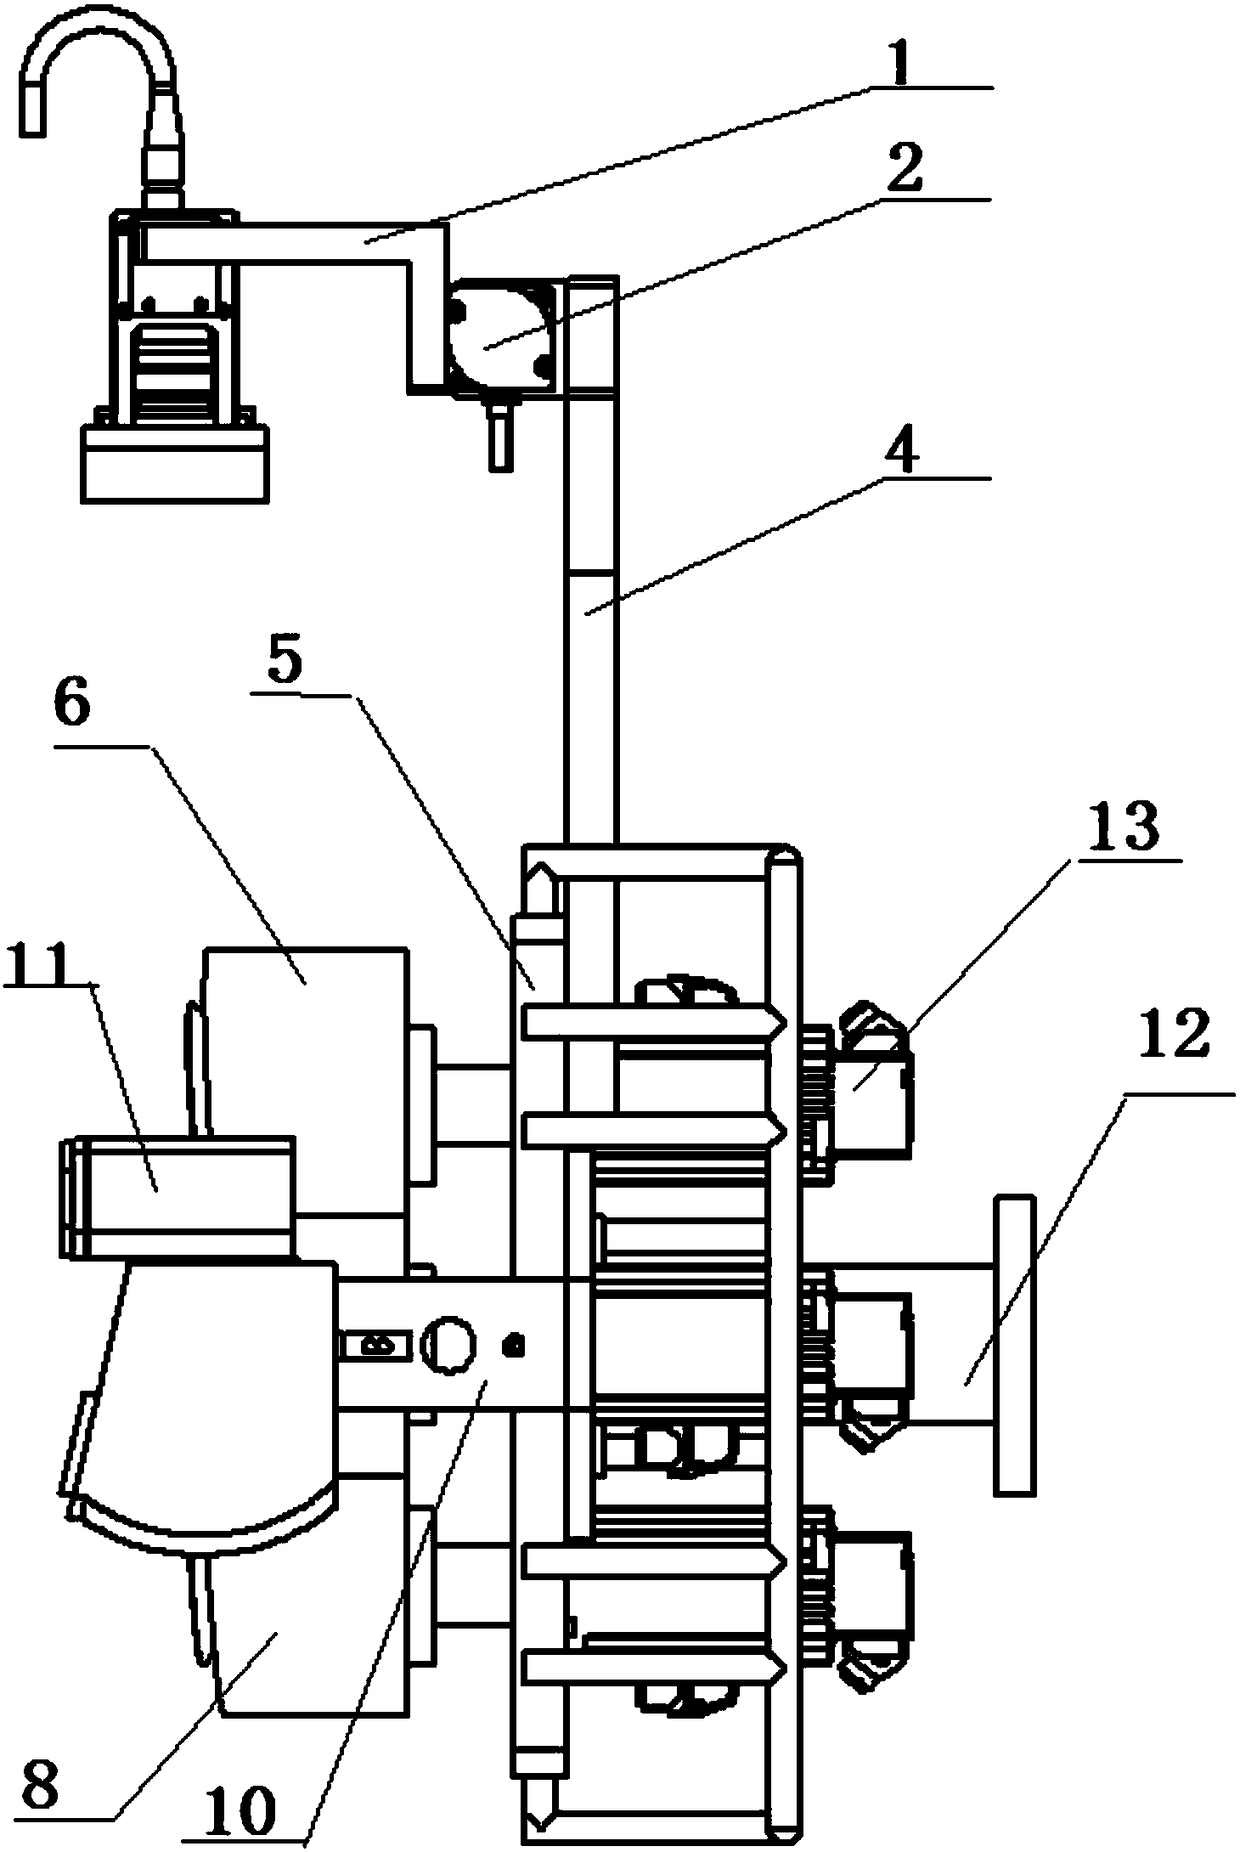 Robot servo gripper for double-machine cooperative carrying of vehicle bumpers